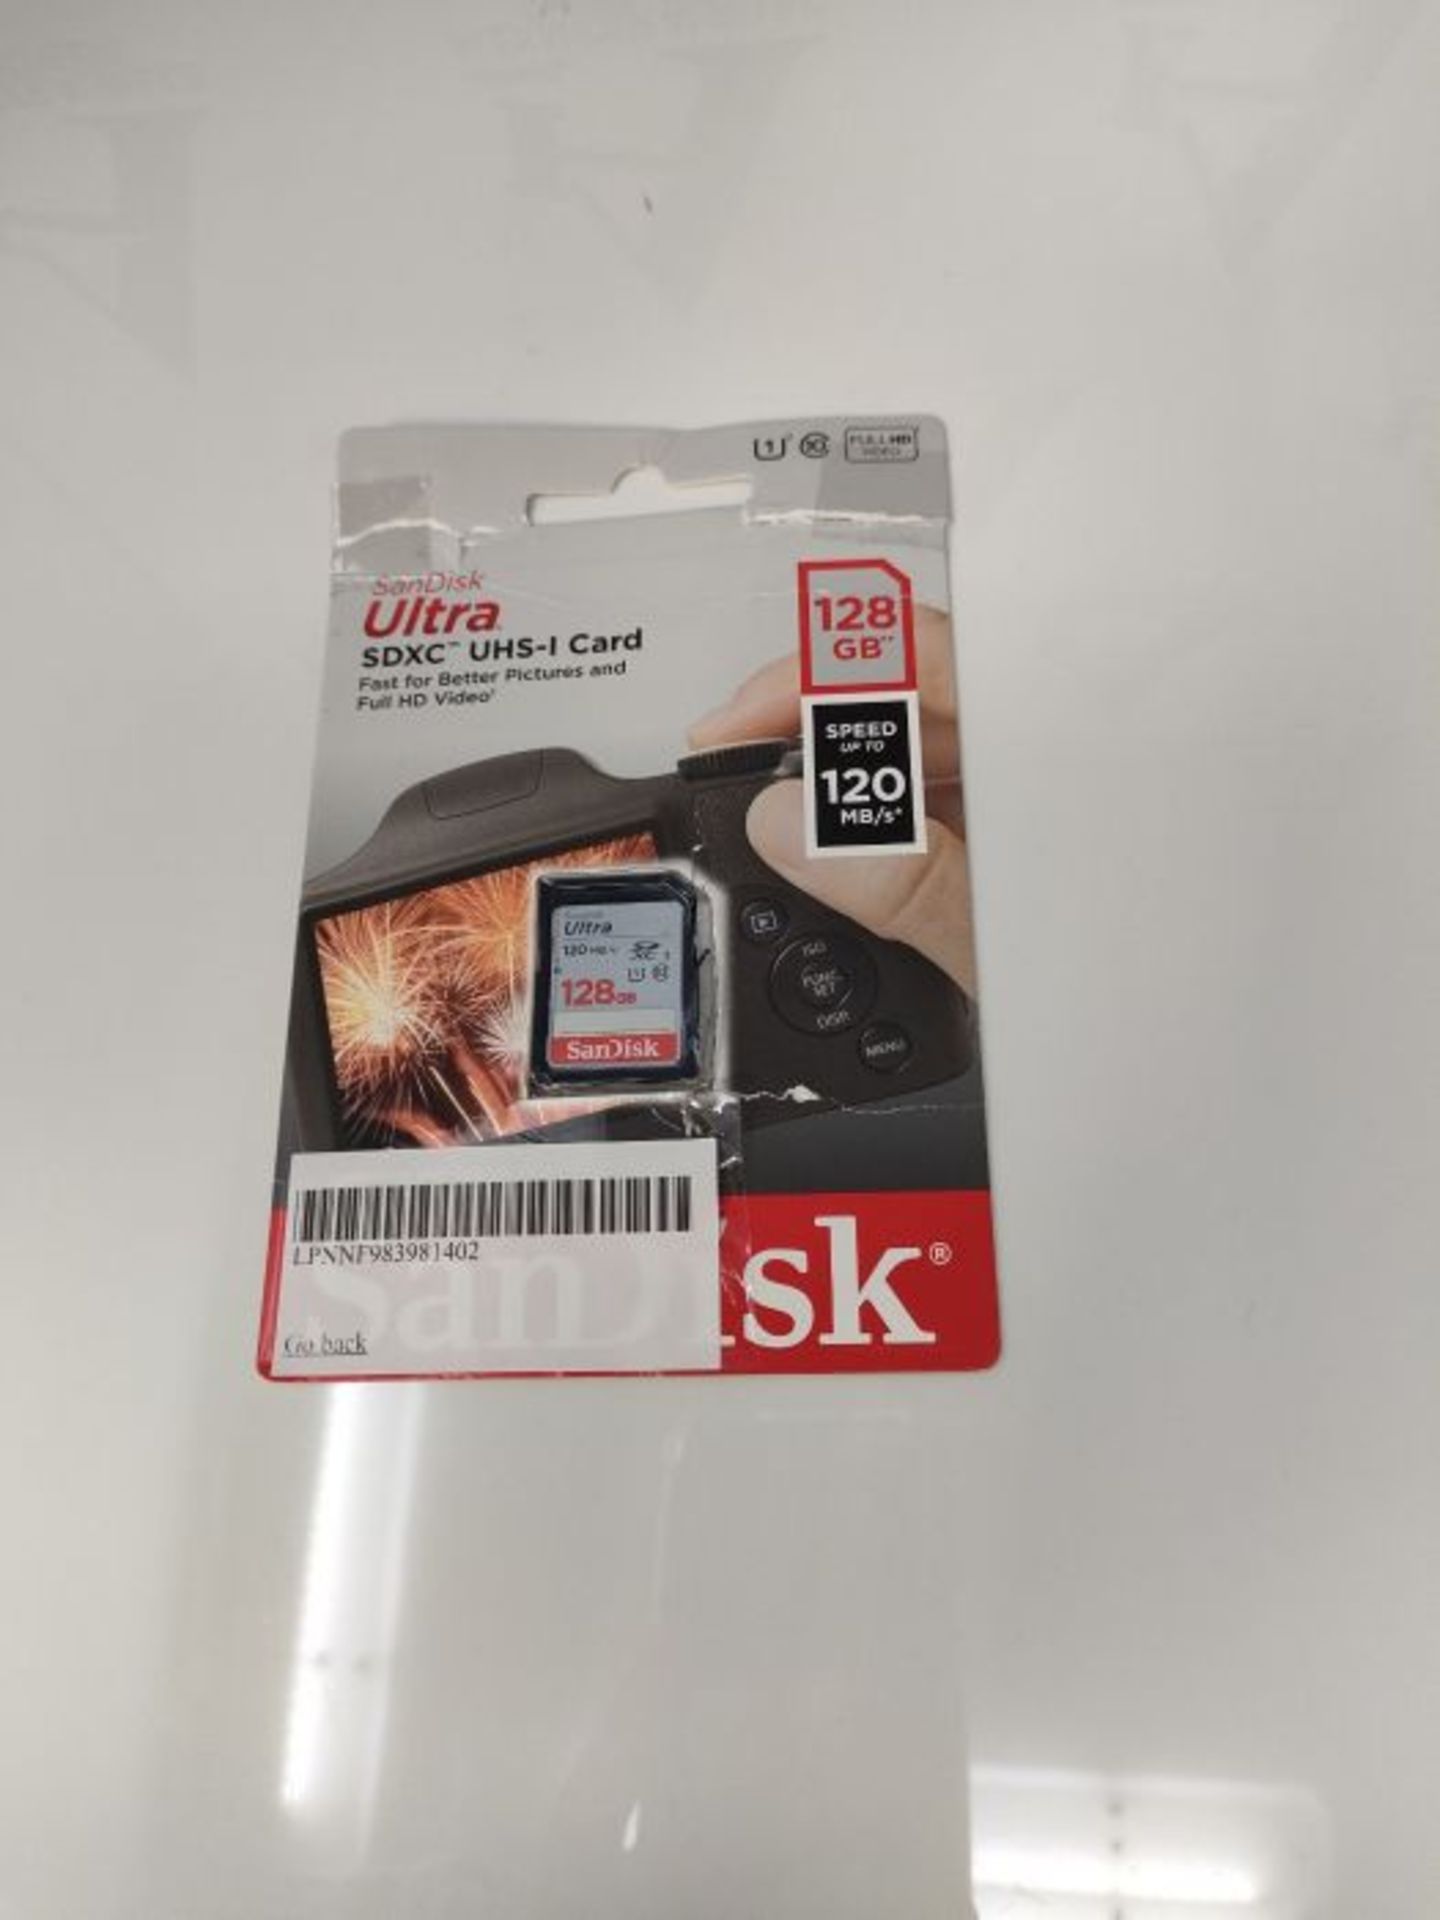 SanDisk Ultra SDXC UHS-I memory card 128 GB (for entry-level and mid-range compact cam - Image 2 of 2